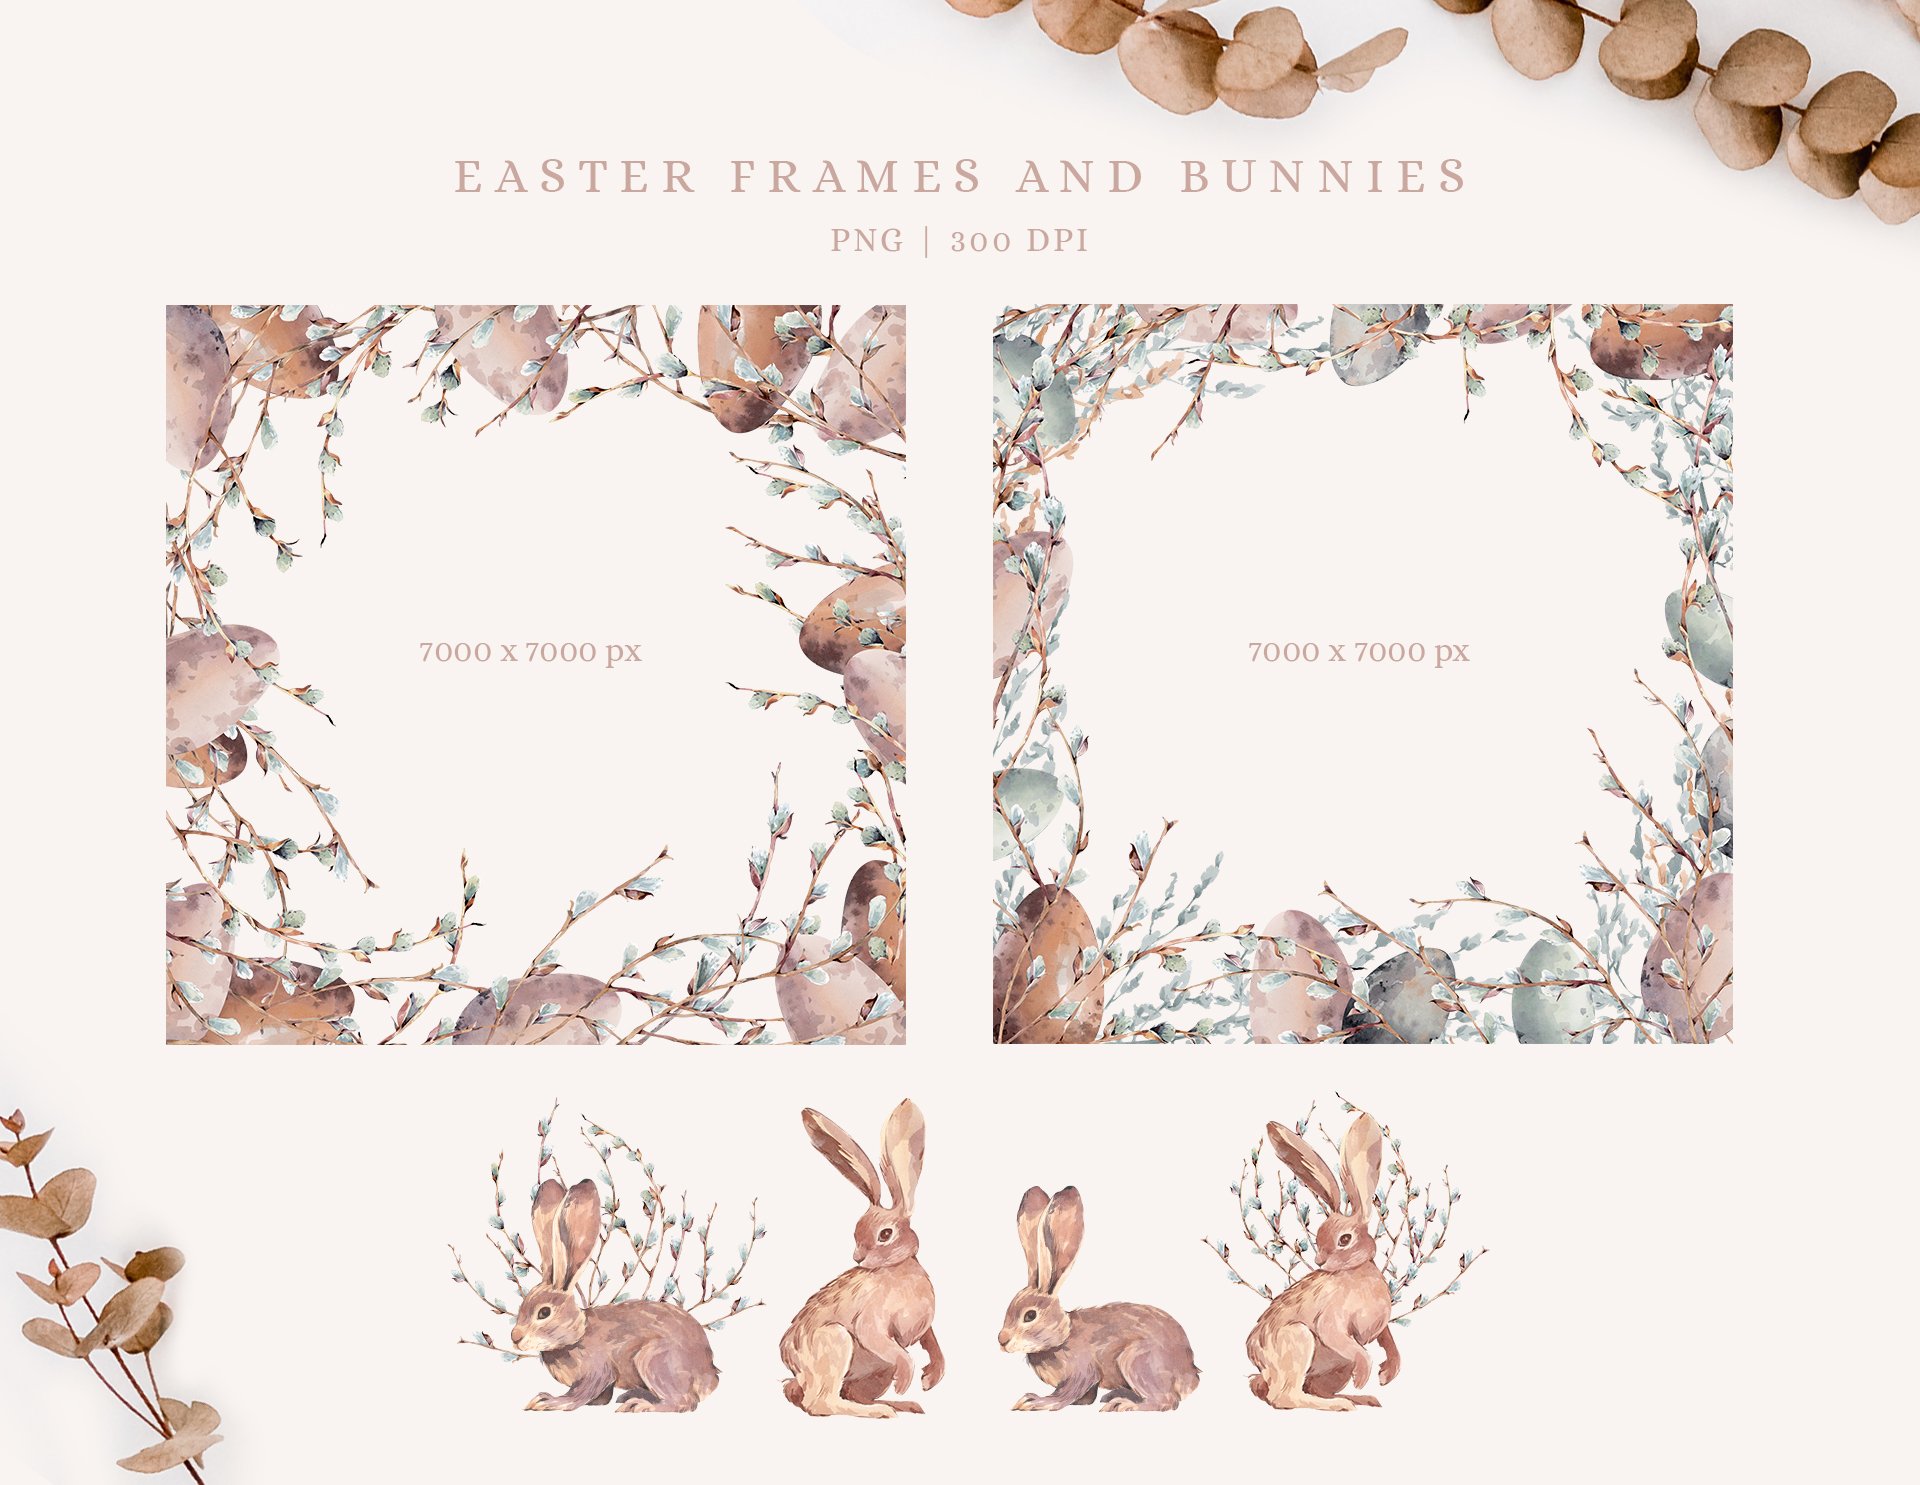 Delicate Easter frames in a spring style.